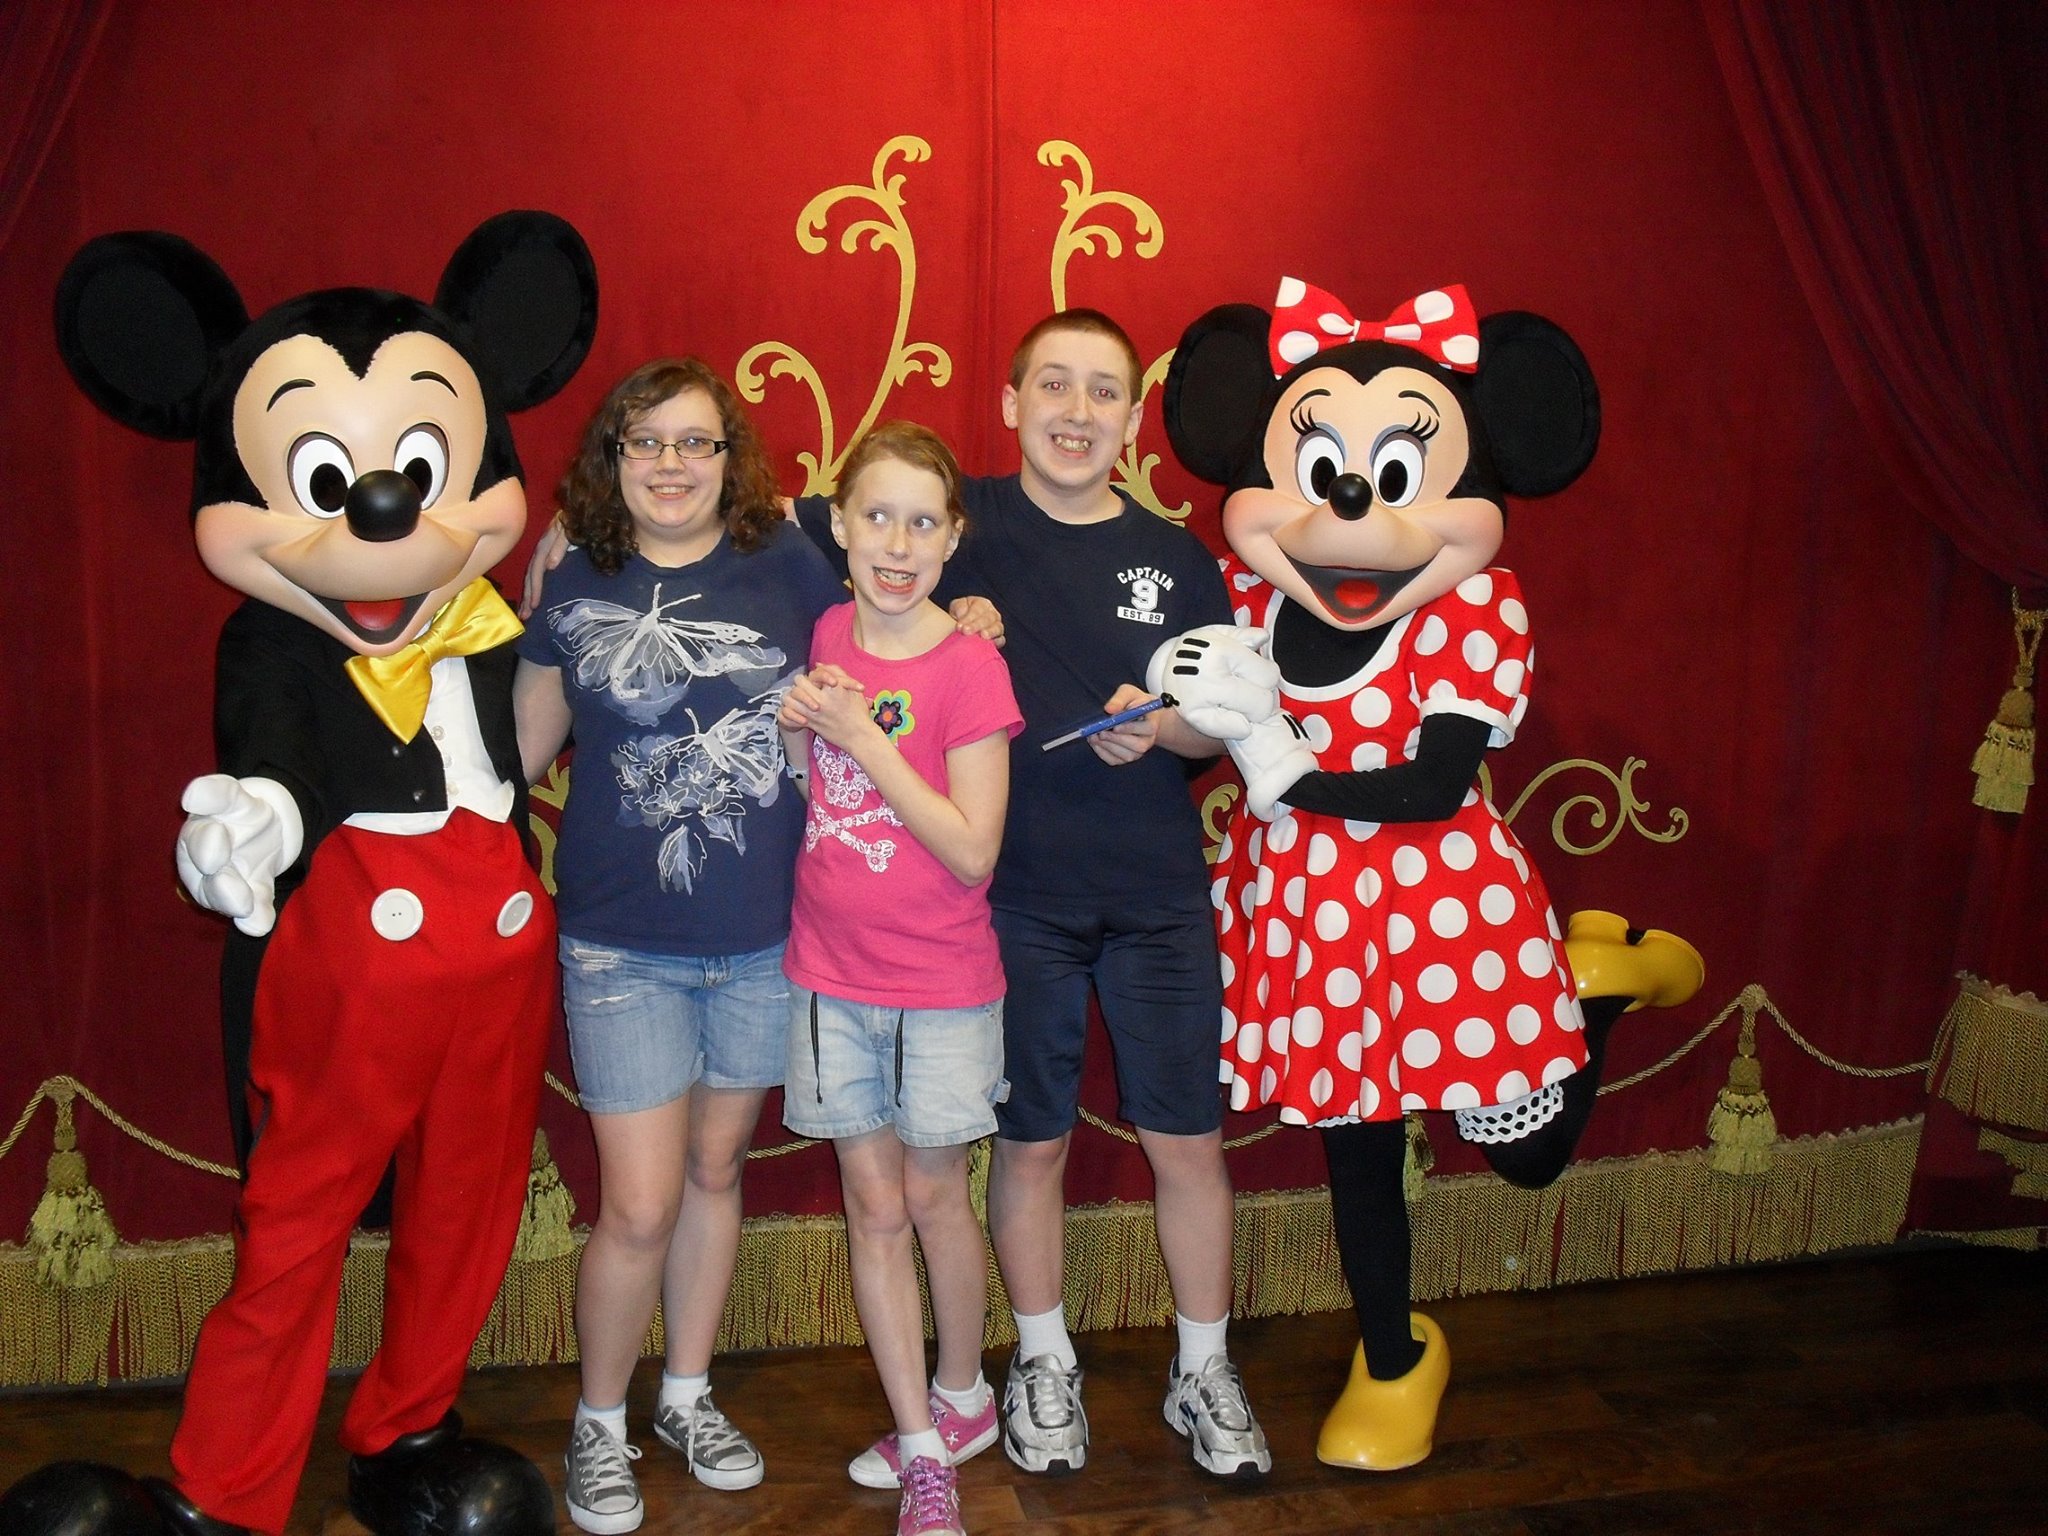 Me and my Sisters with Mickey and Minnie Mouse